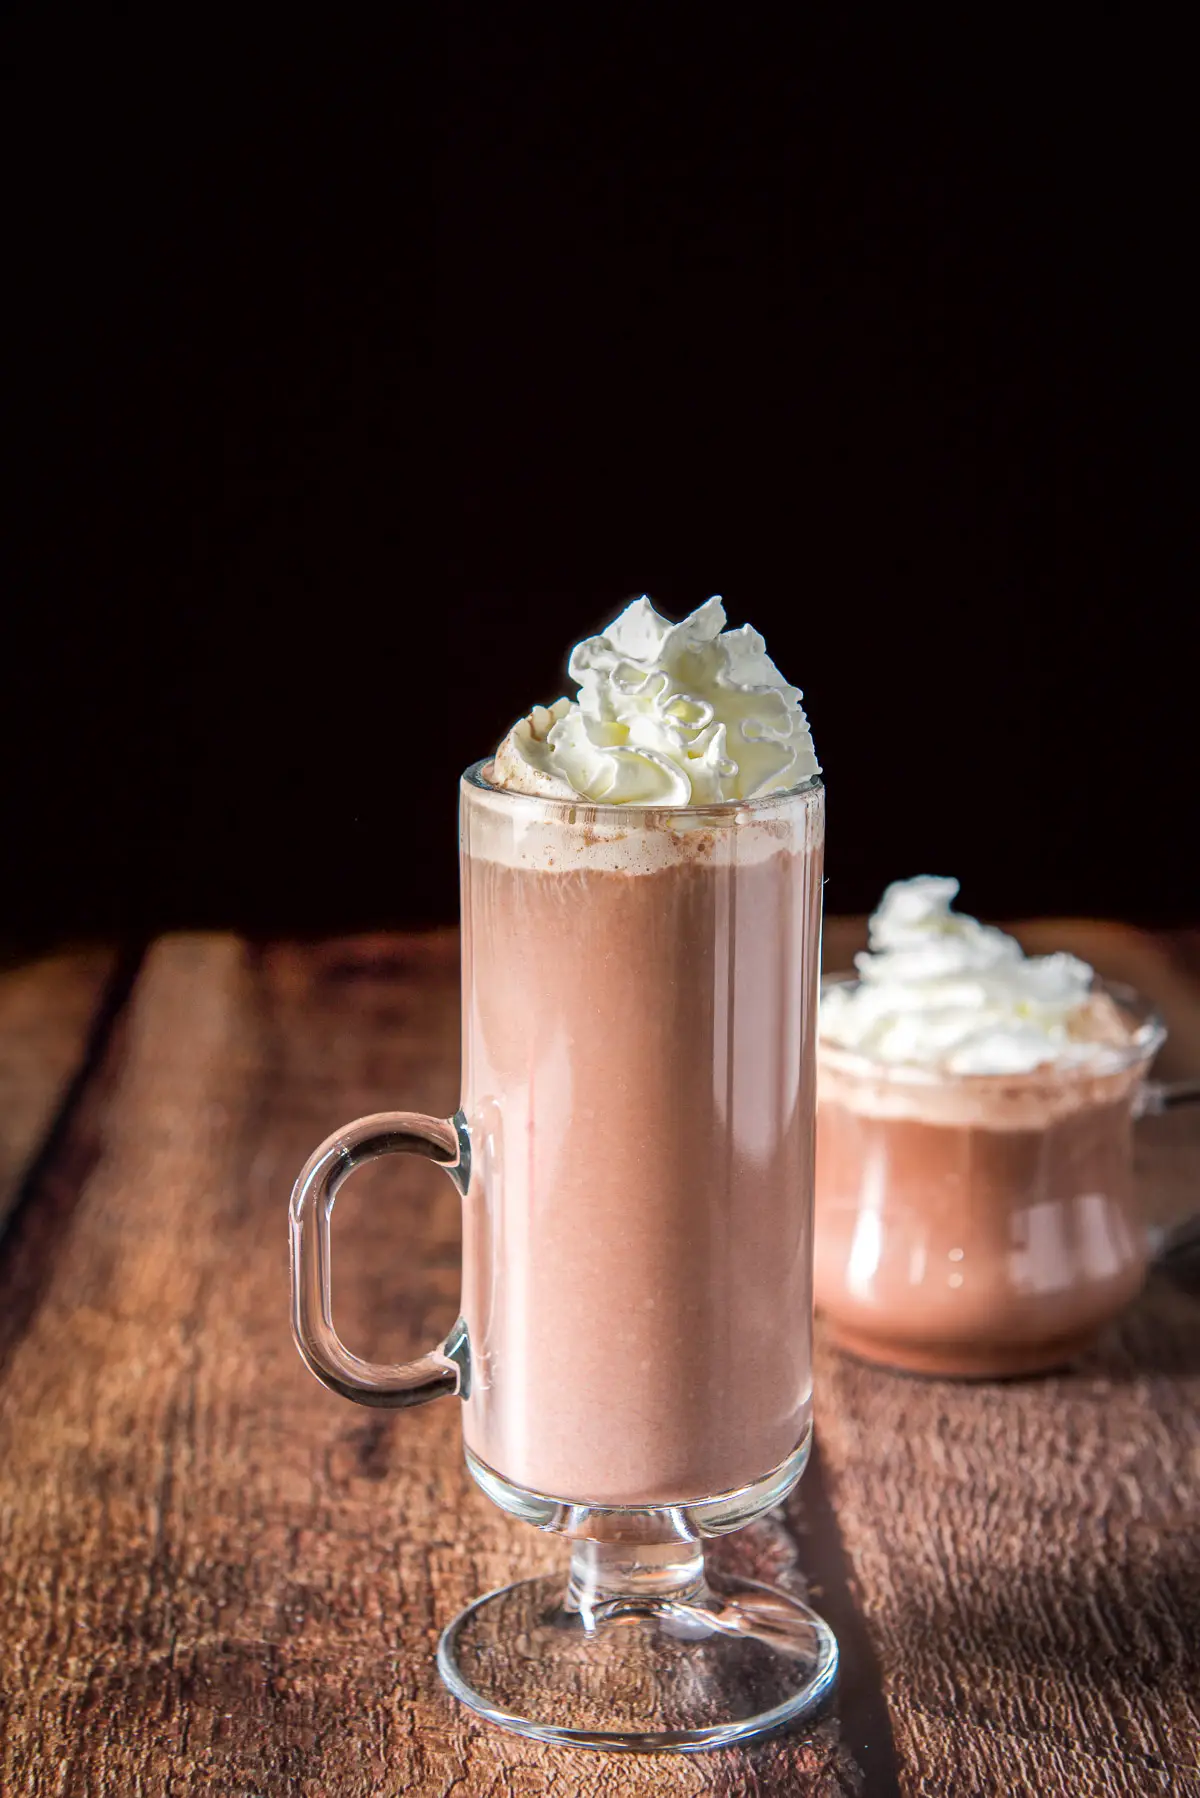 Two glass mugs filled with the chocolate drink with whipped cream on top